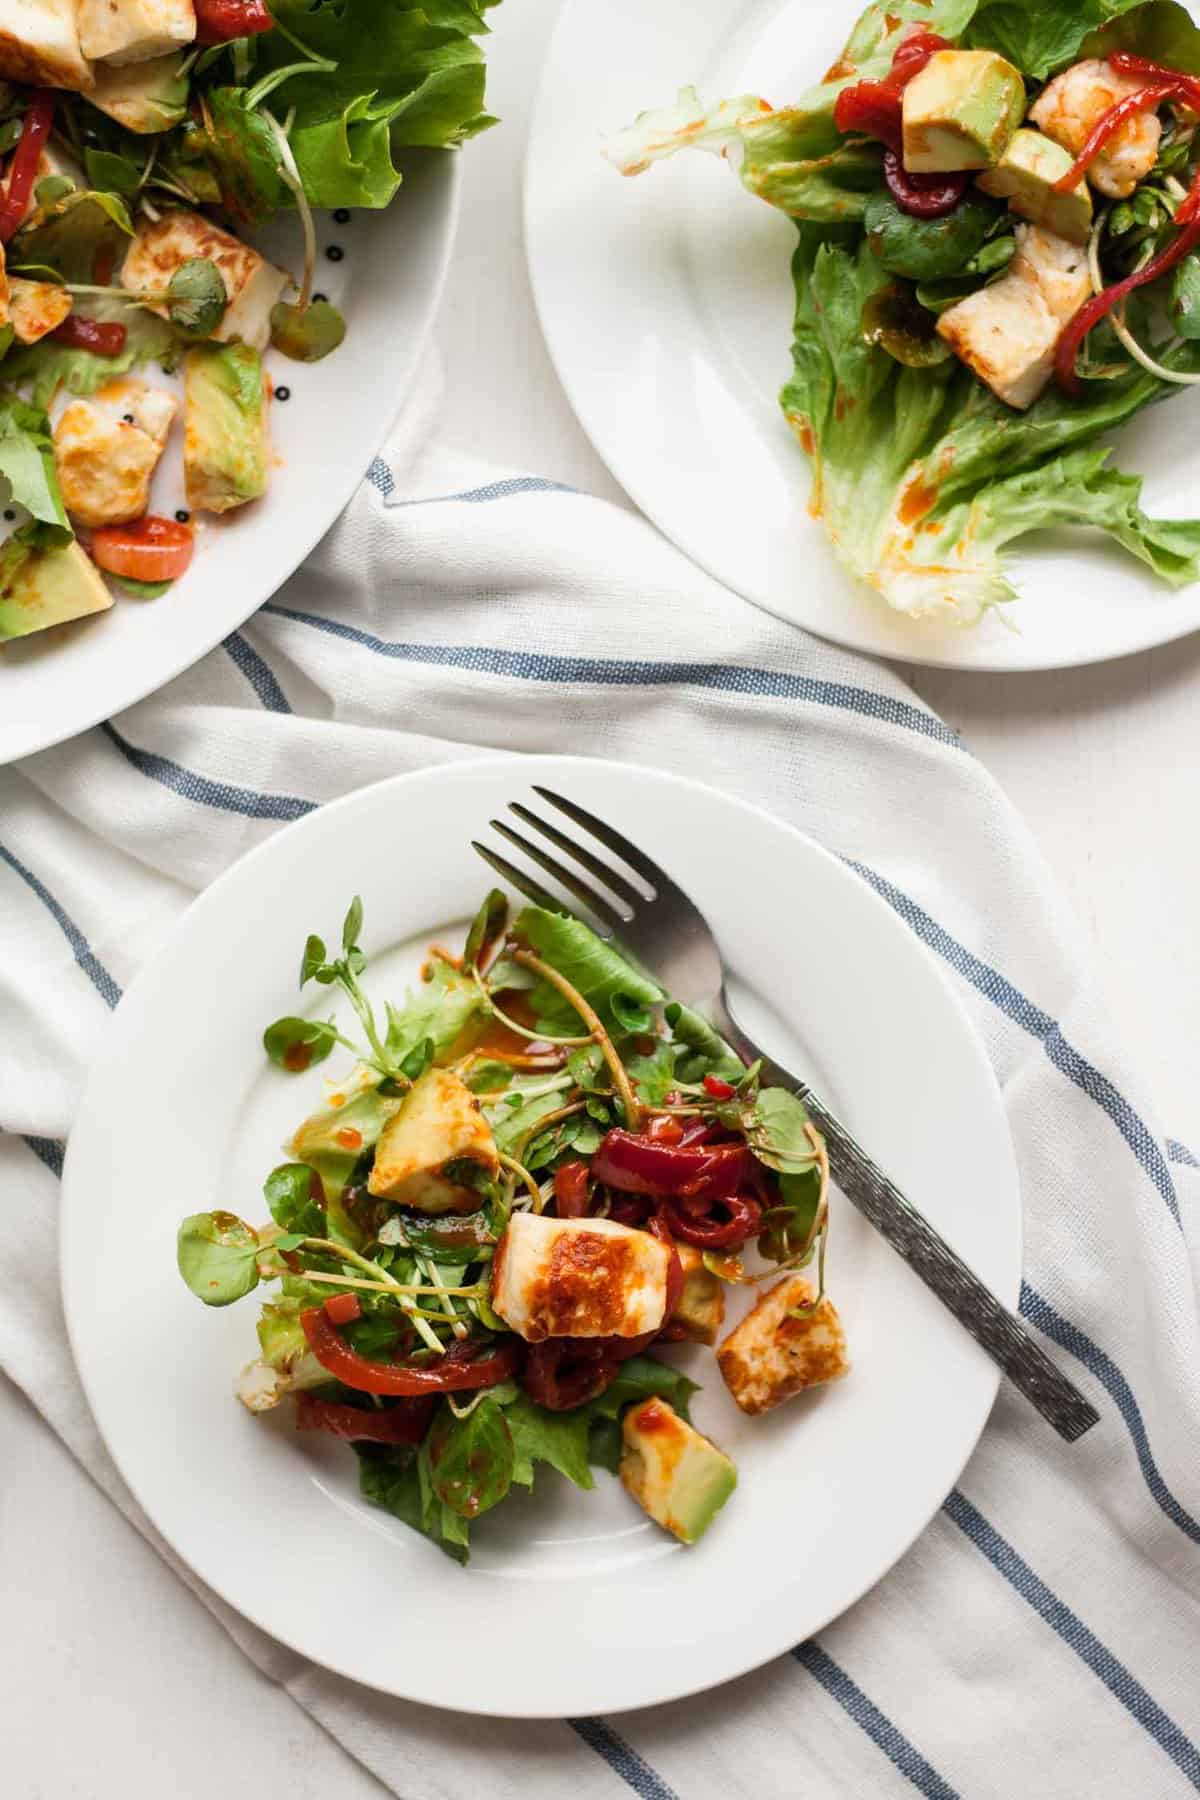 Smoky Halloumi Avocado Salad - a simple salad recipe, full of flavour and textures, a perfect light evening meal for spring | eatloveeats.com